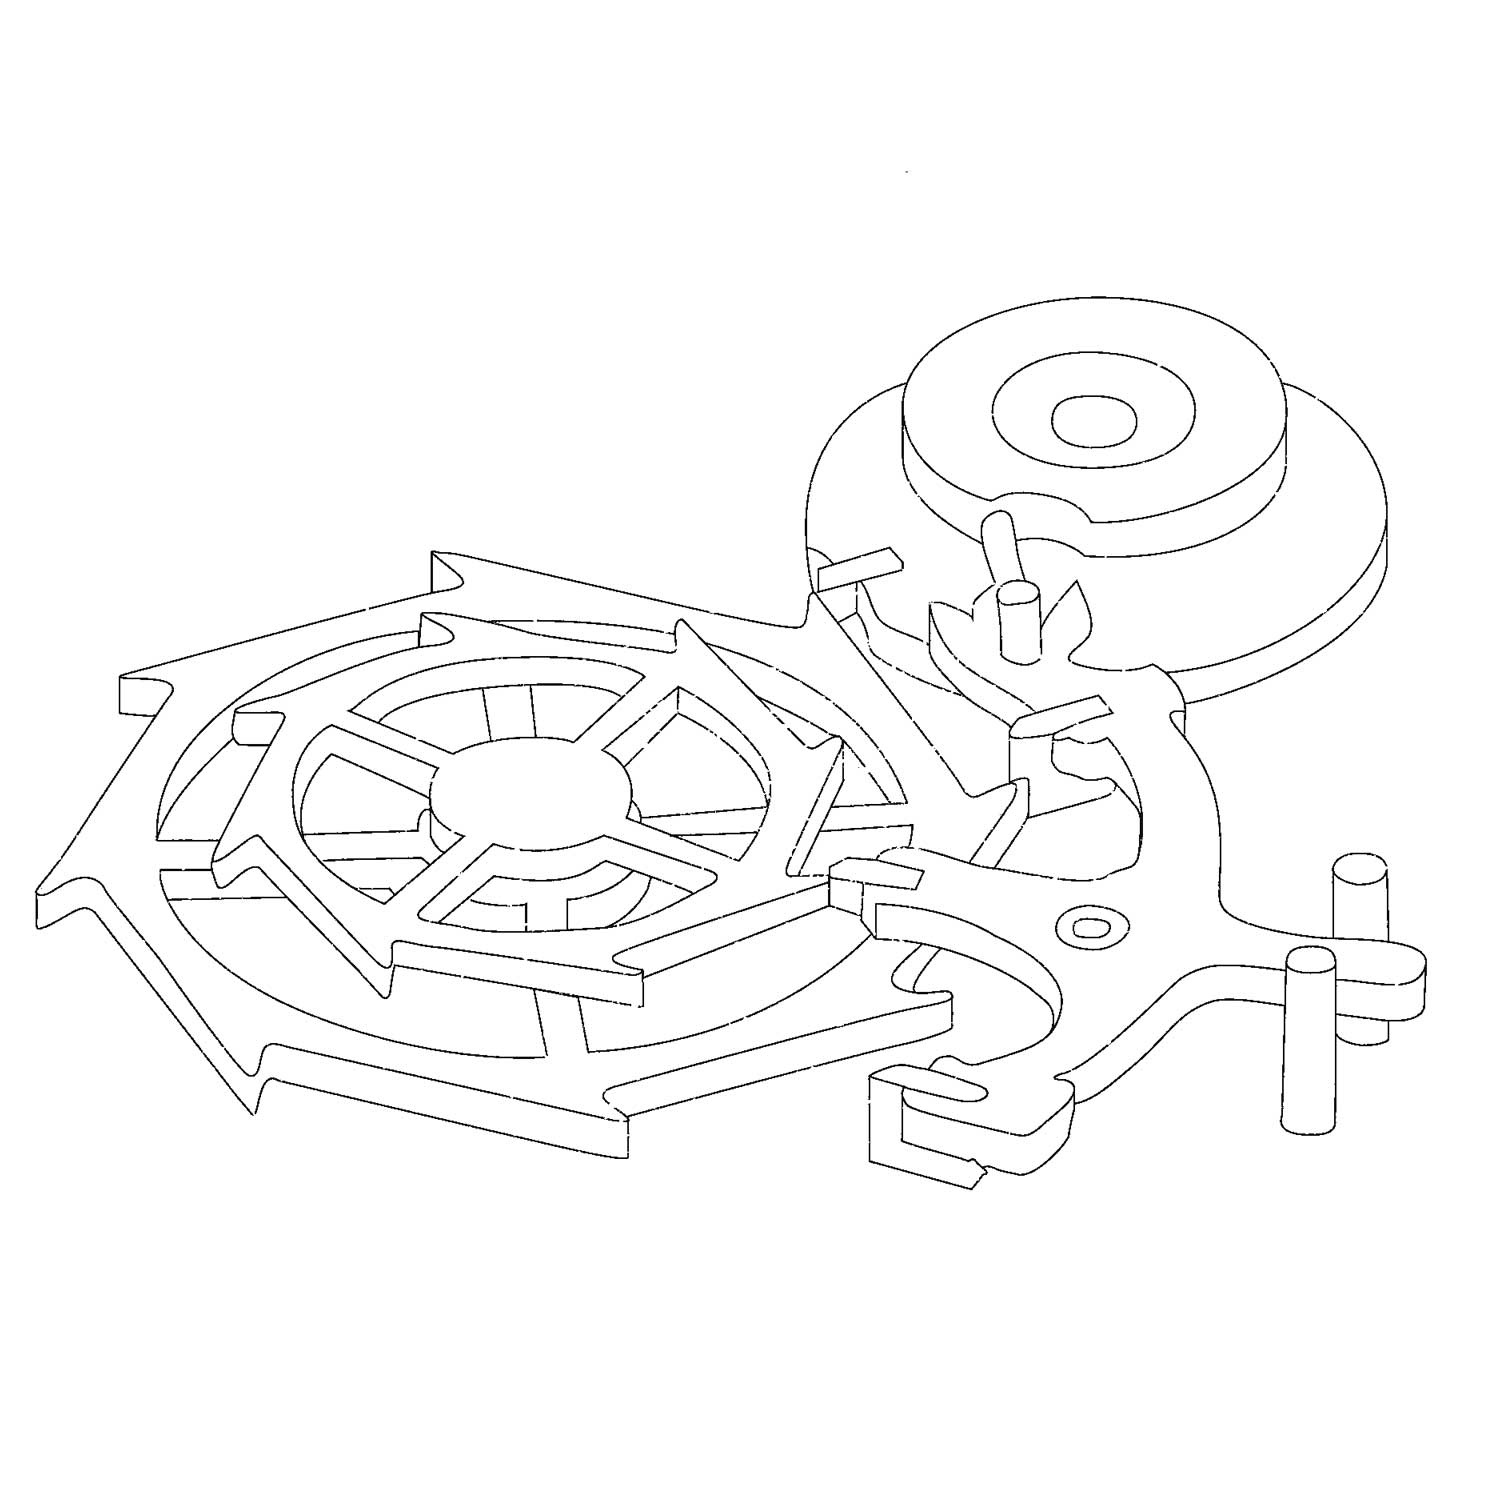 A sketch of the Co-Axial escapement, a technology hugely important to Omega’s 21st century success